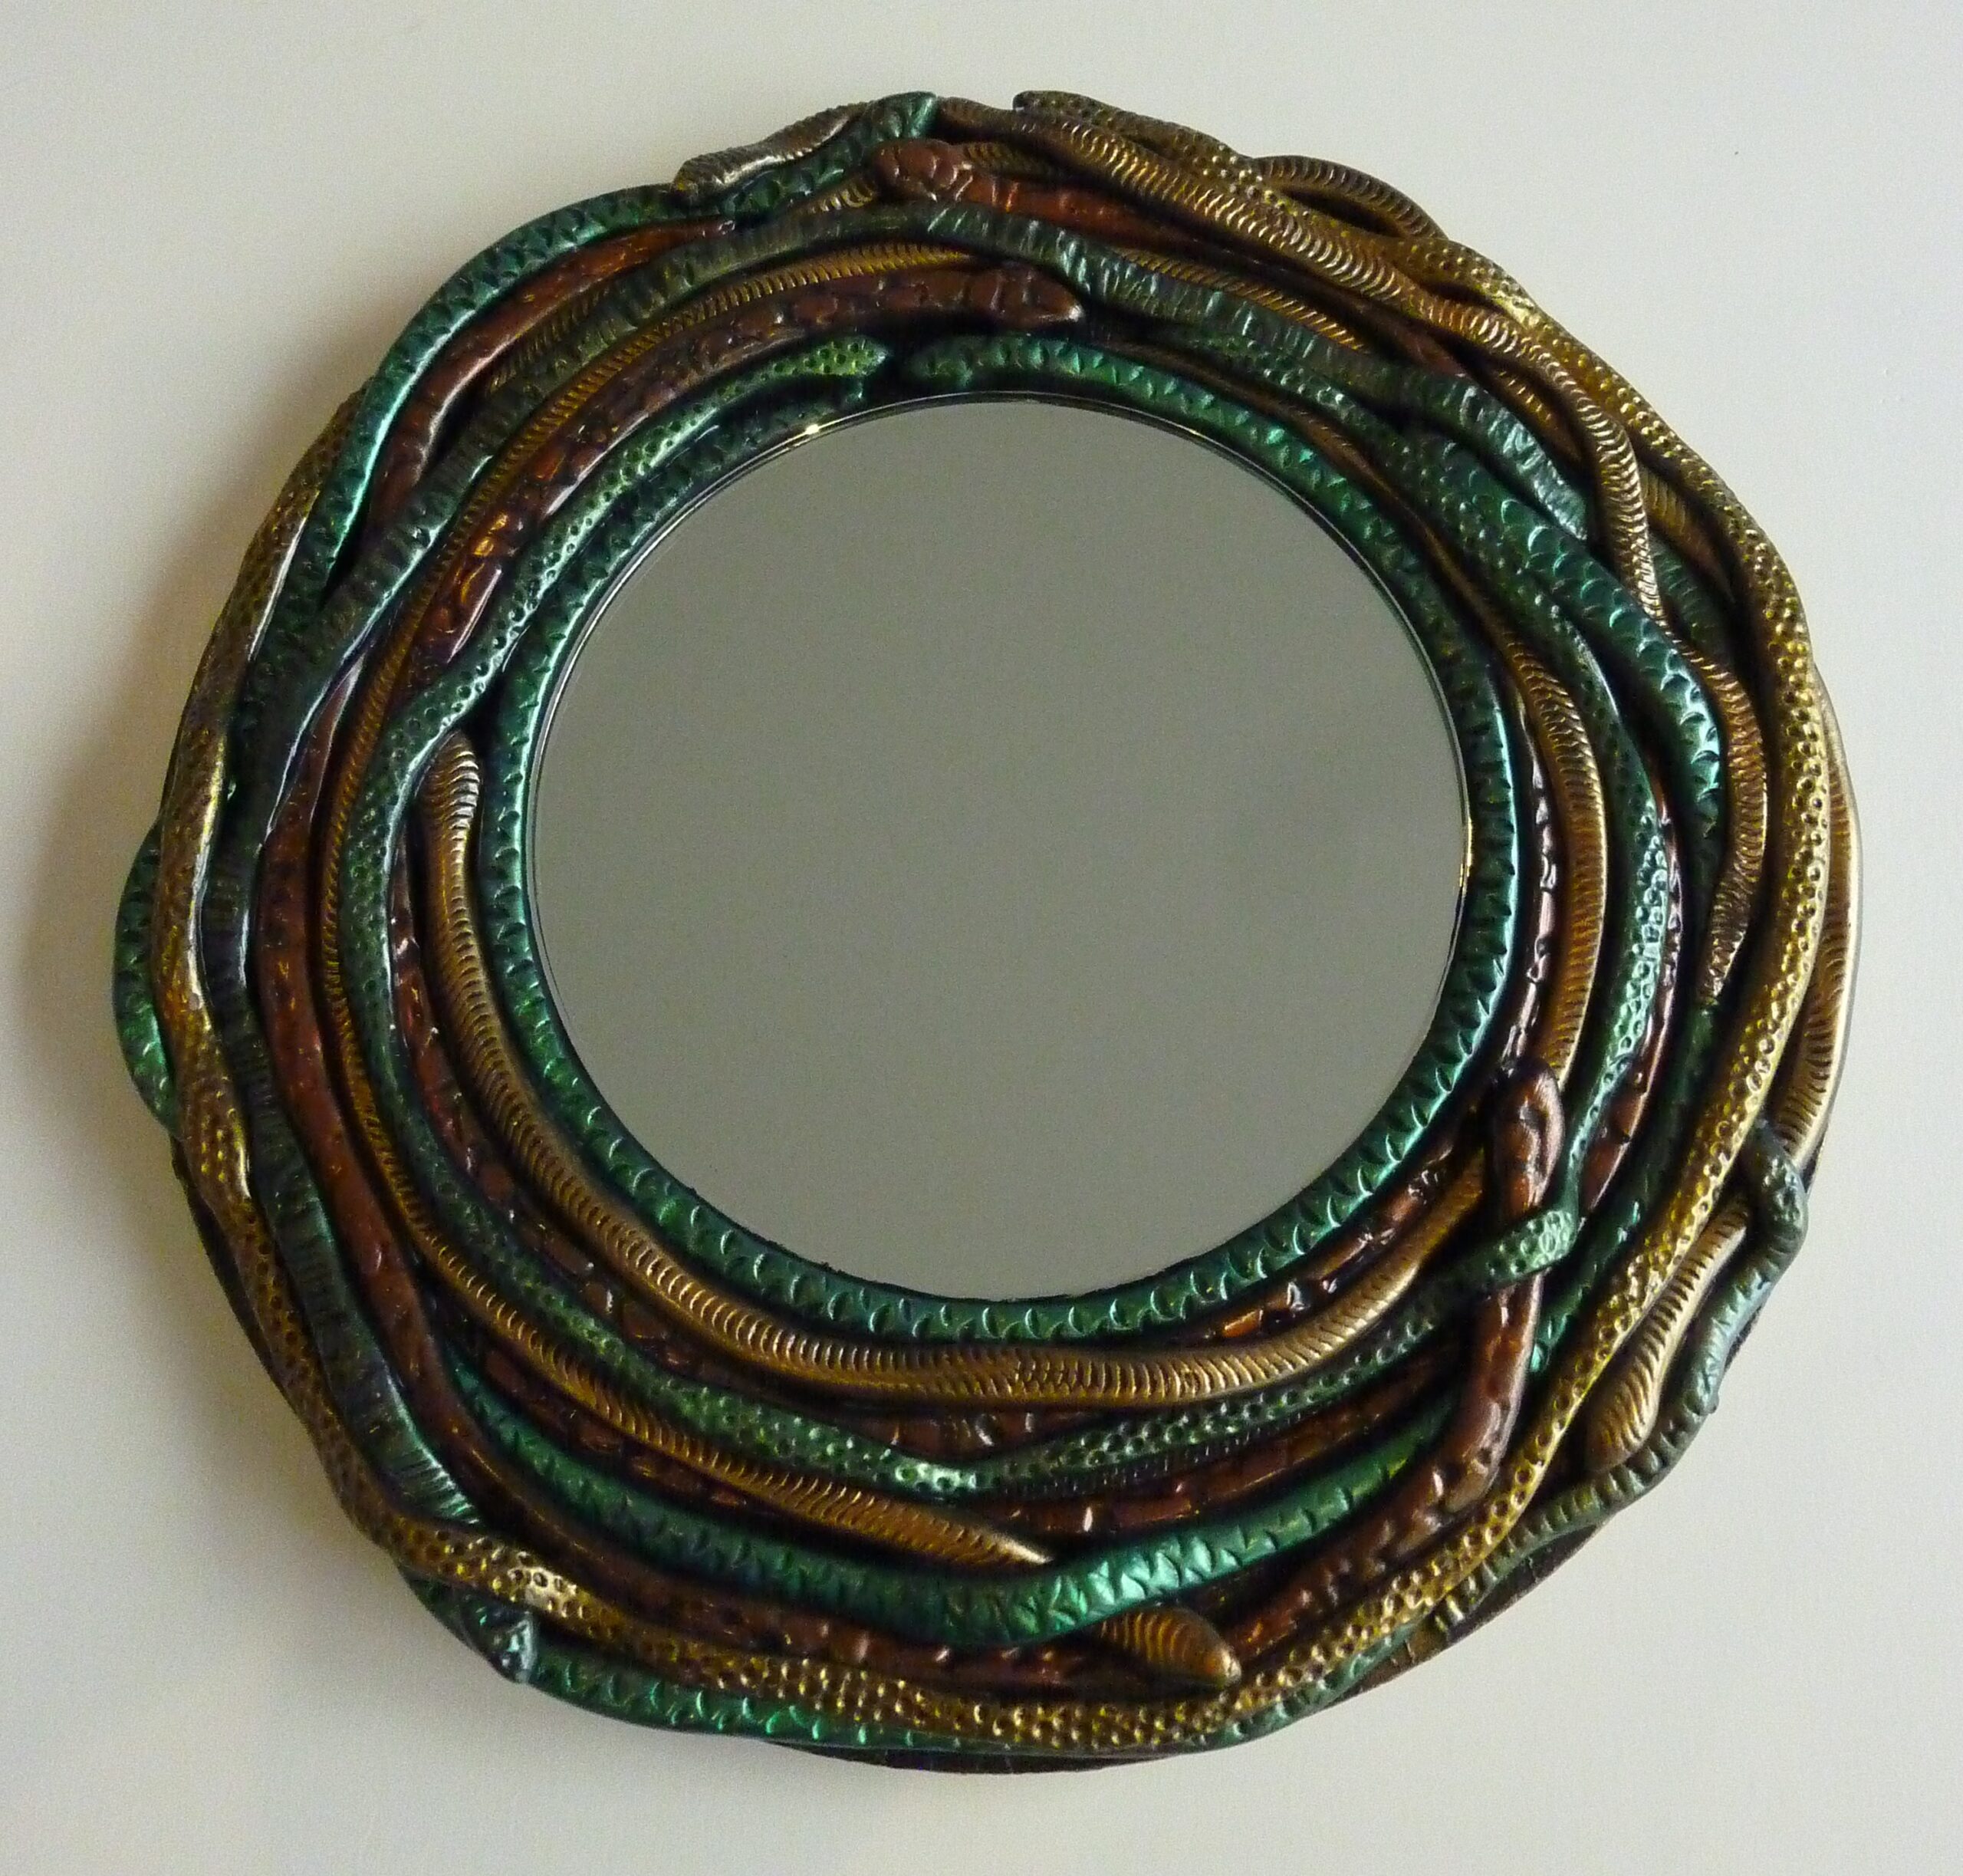 Image of a round mirror with an edging of wound snakes made from polymer clay